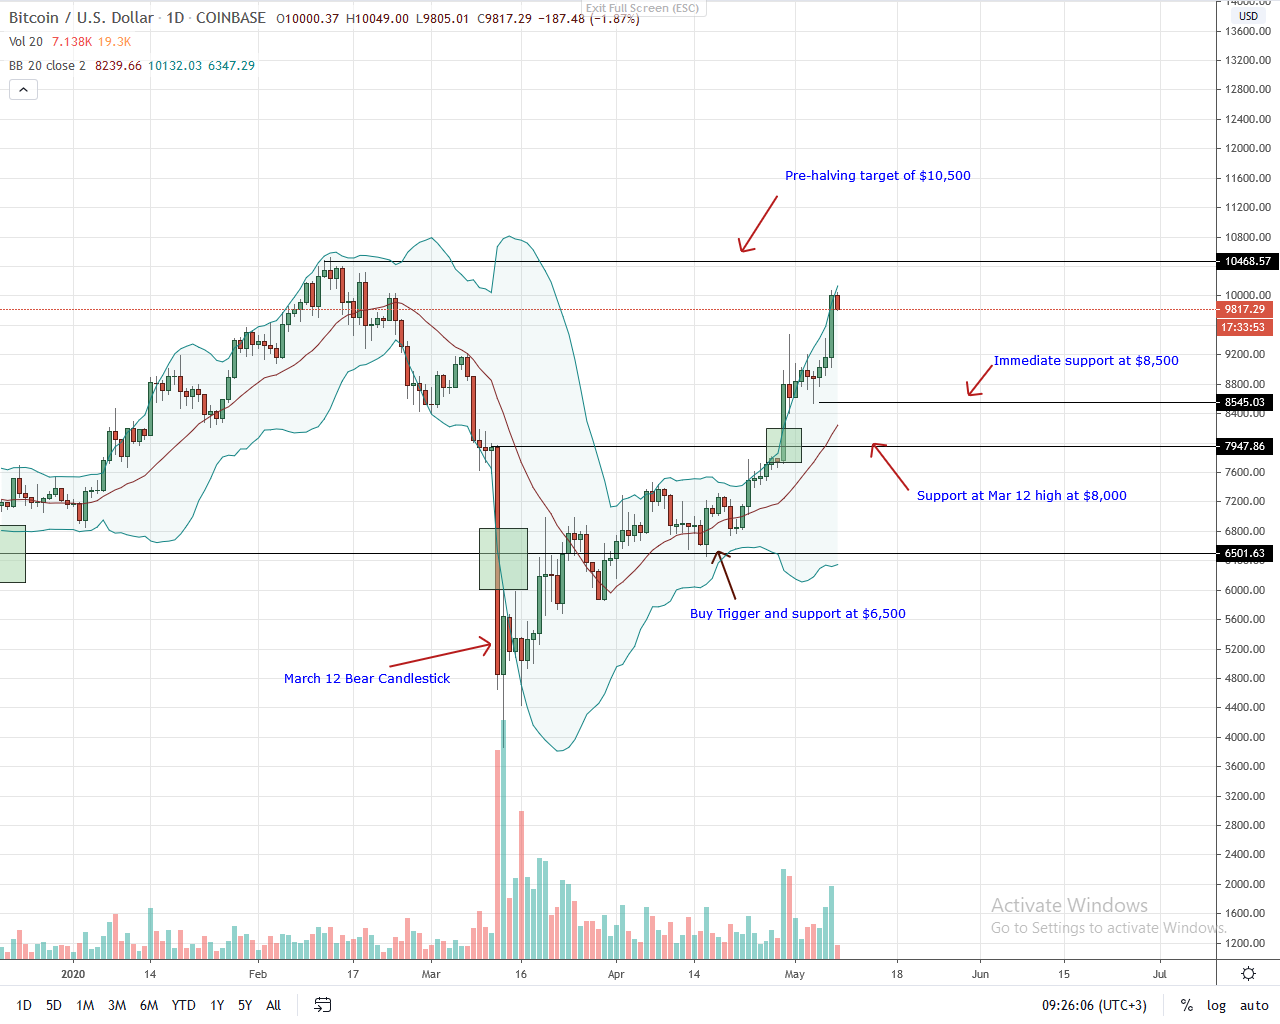 Bitcoin Daily Chart for May 8